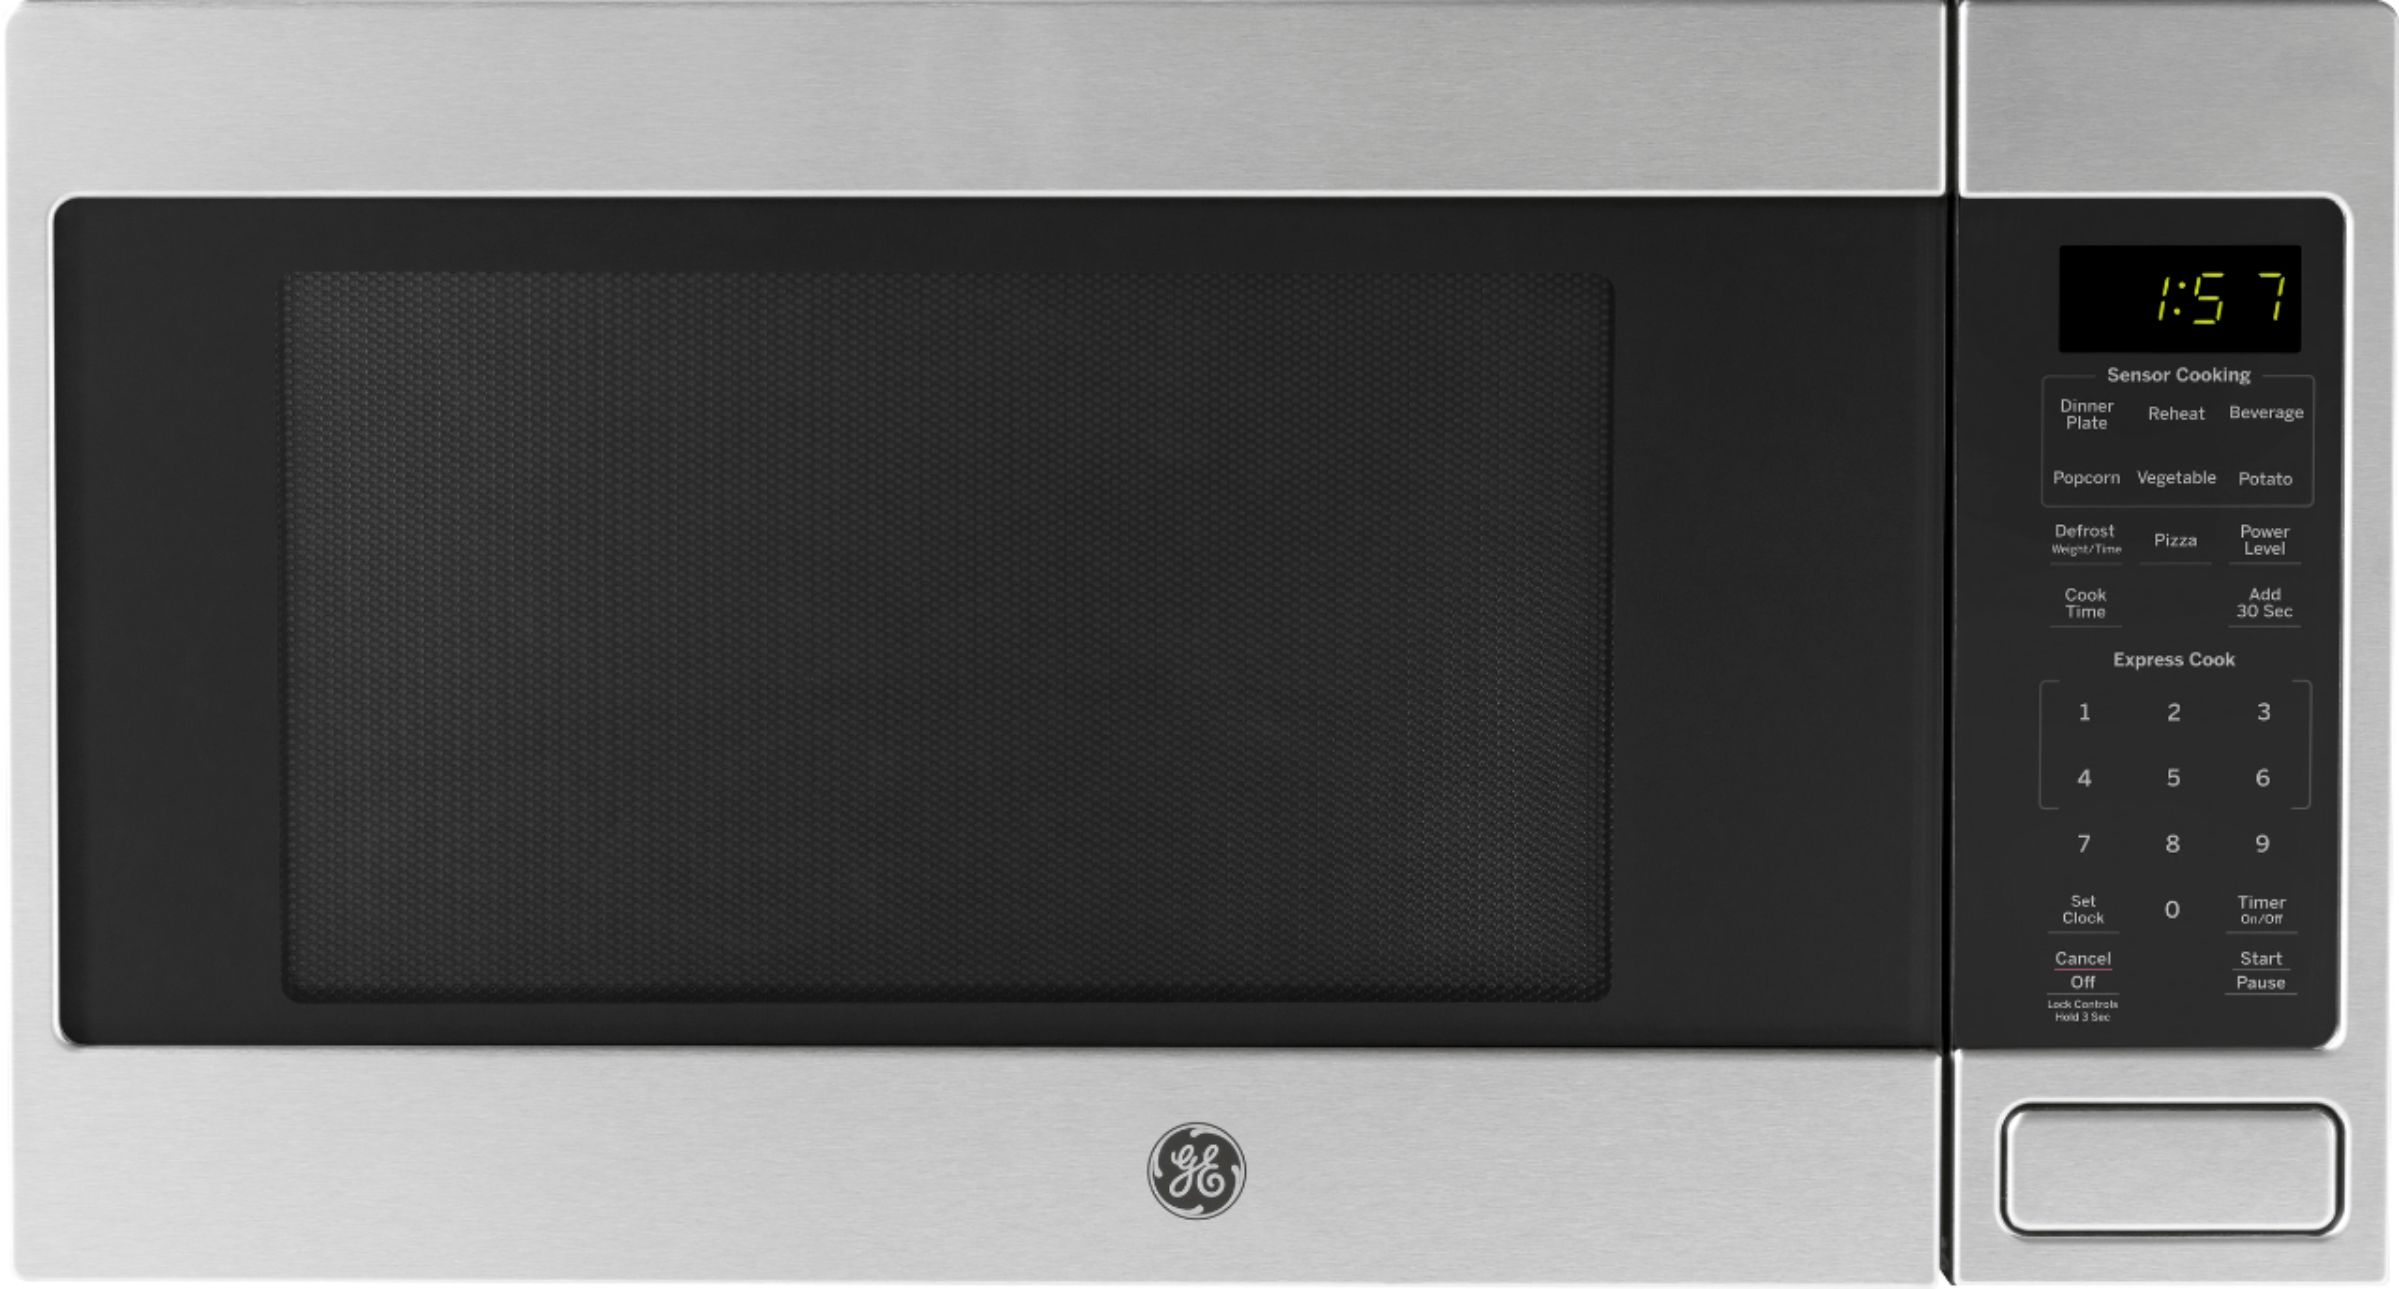 GE PVM1870SMSS 1.8 cu. ft. Over-the-Range Microwave Oven with 1100 Cooking  Watts, CircuWave Cooking System, Recessed Turntable, Full-Width Active  Hidden Vent, 300 CFM Venting and Halogen Lighting: Stainless Steel